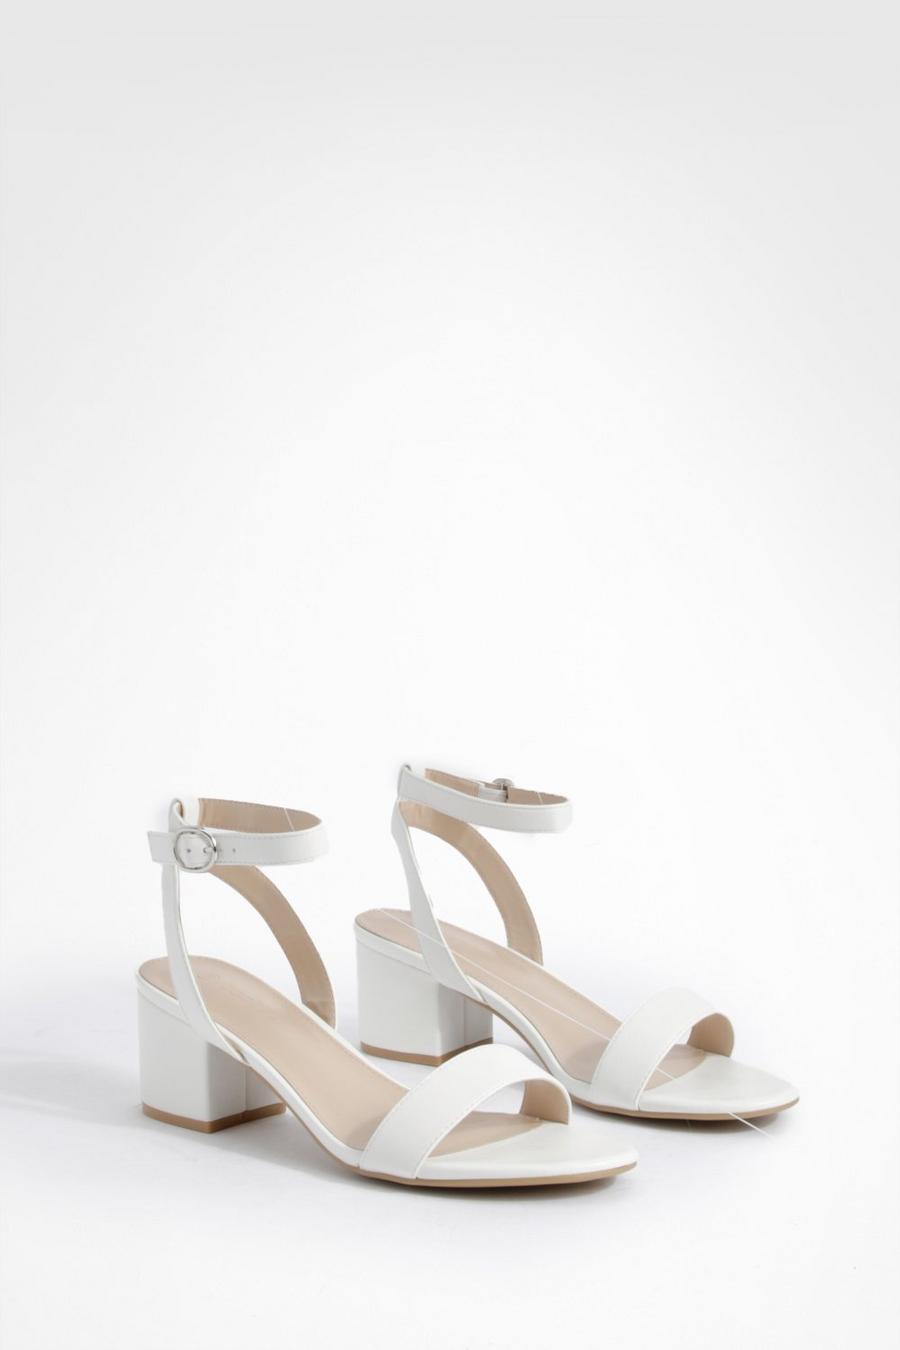 White Wide Width Low Block Barely There Heels